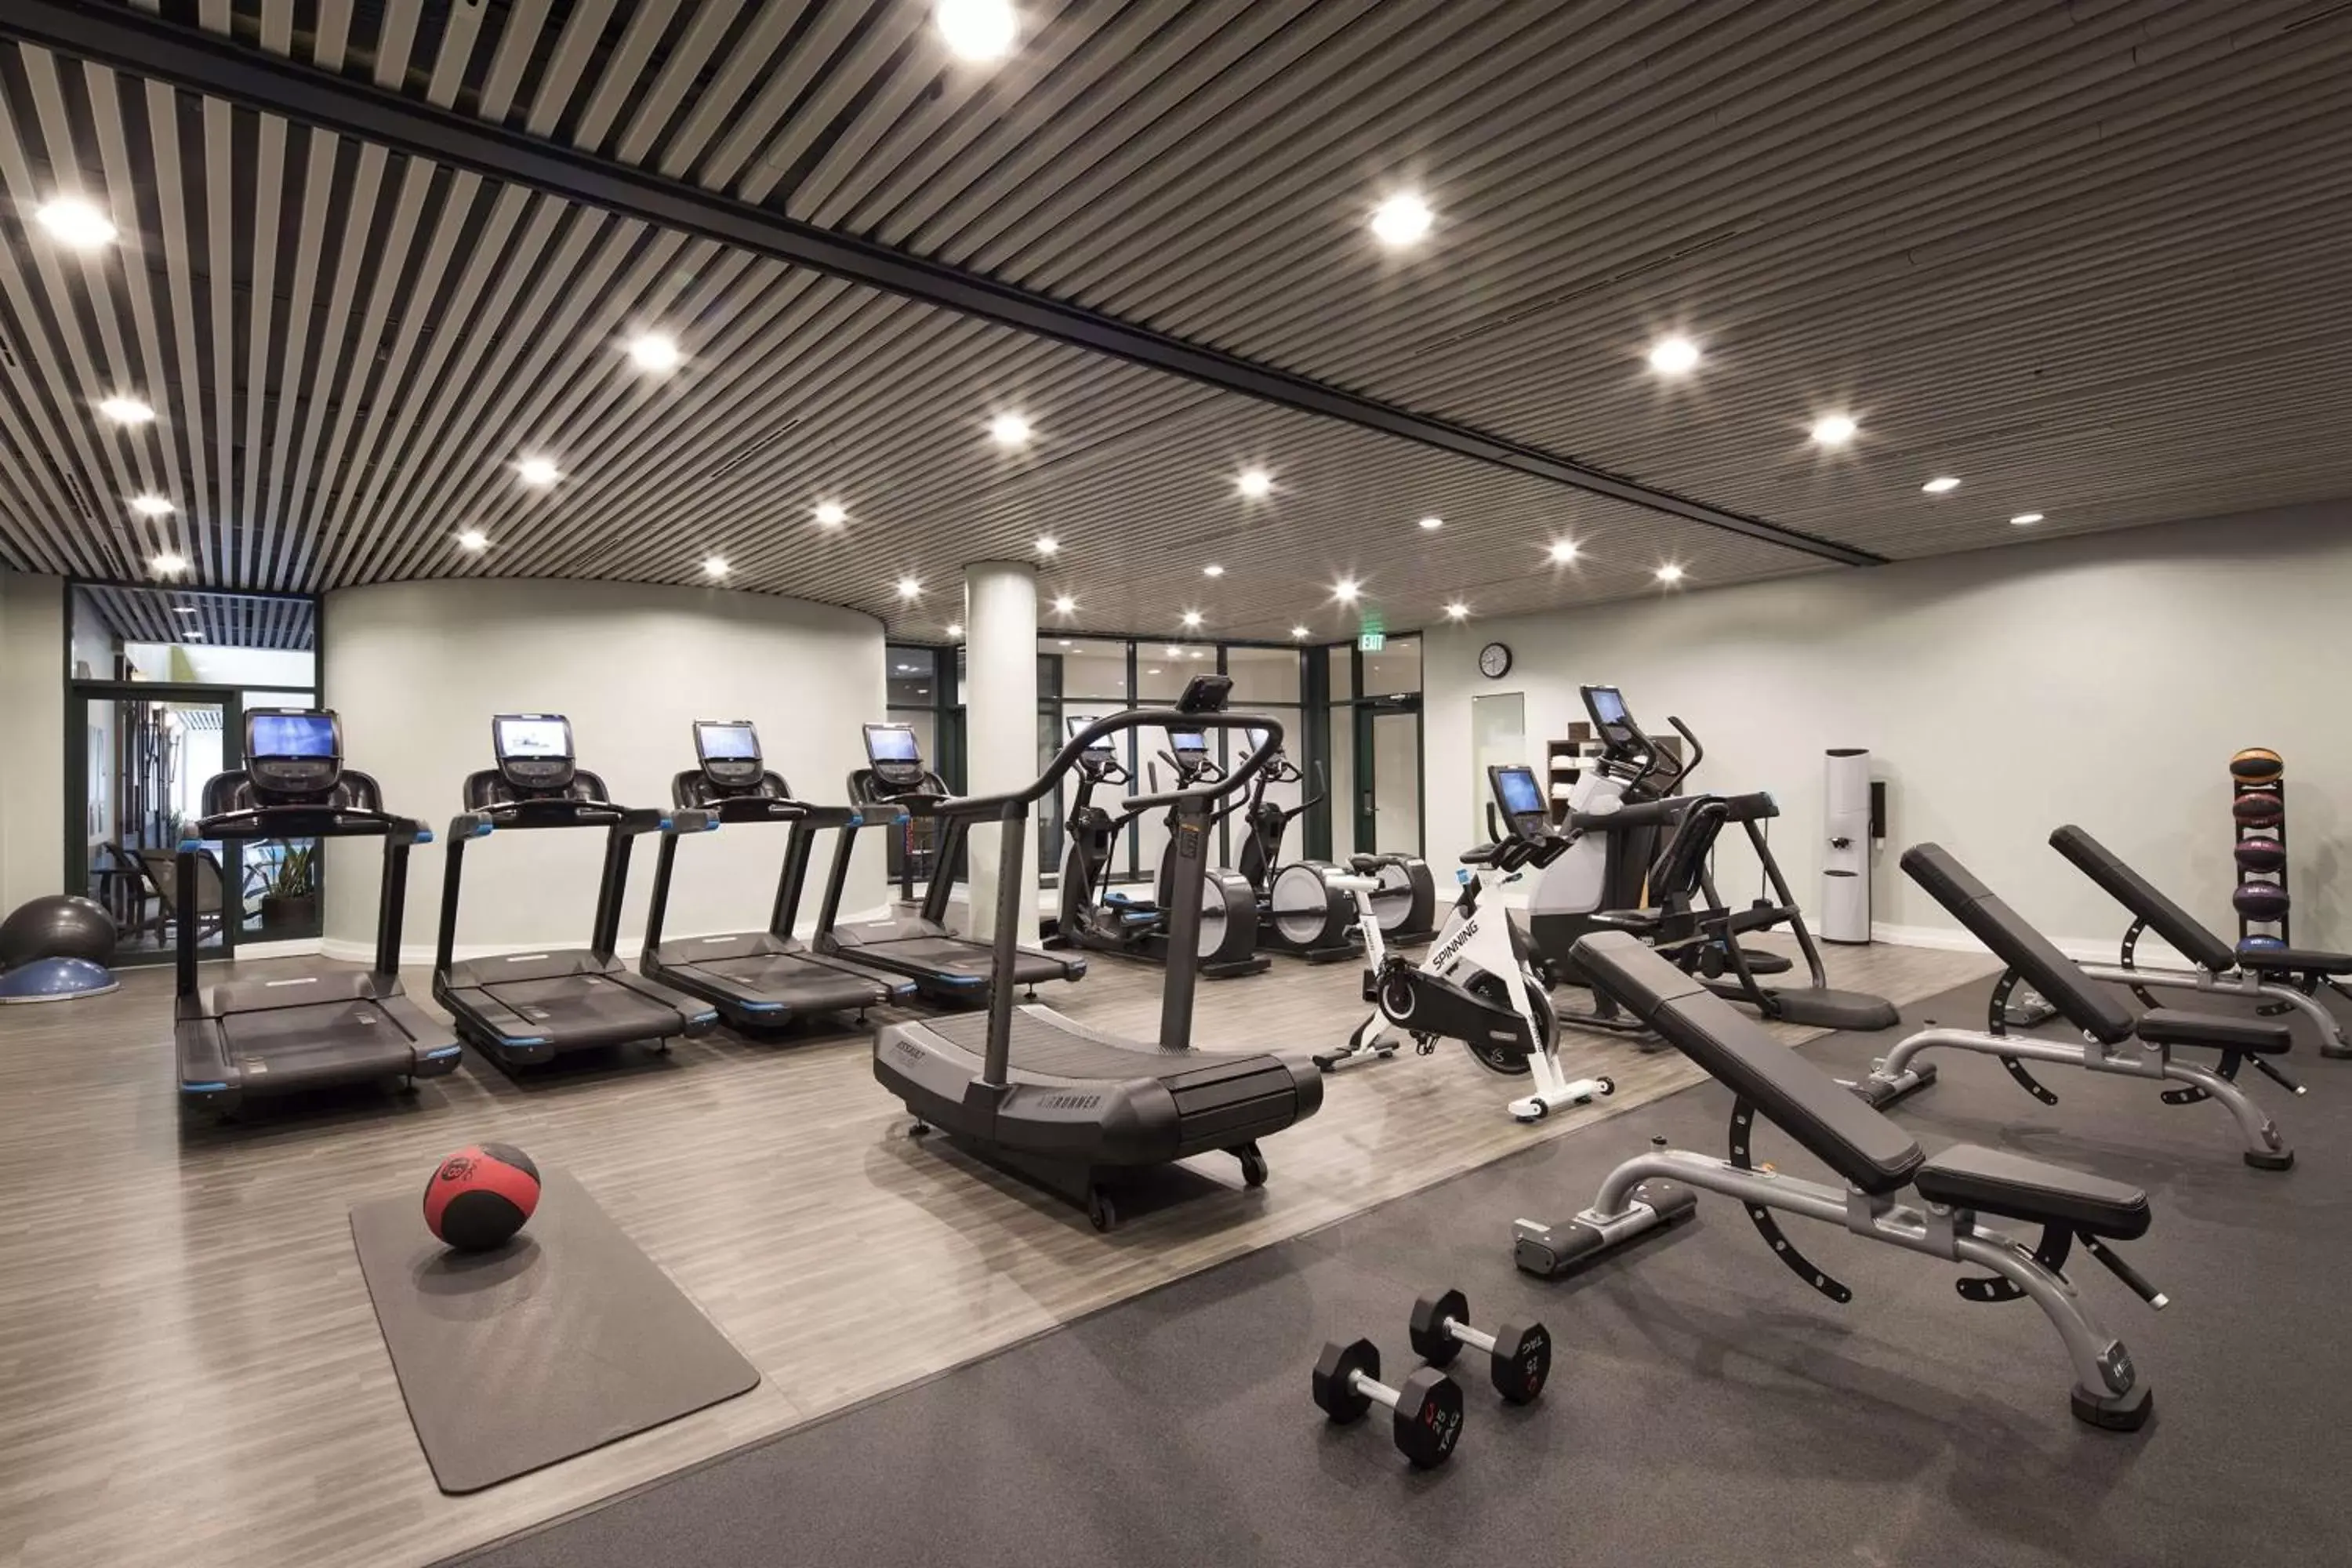 Fitness centre/facilities, Fitness Center/Facilities in The Inverness Denver, a Hilton Golf & Spa Resort